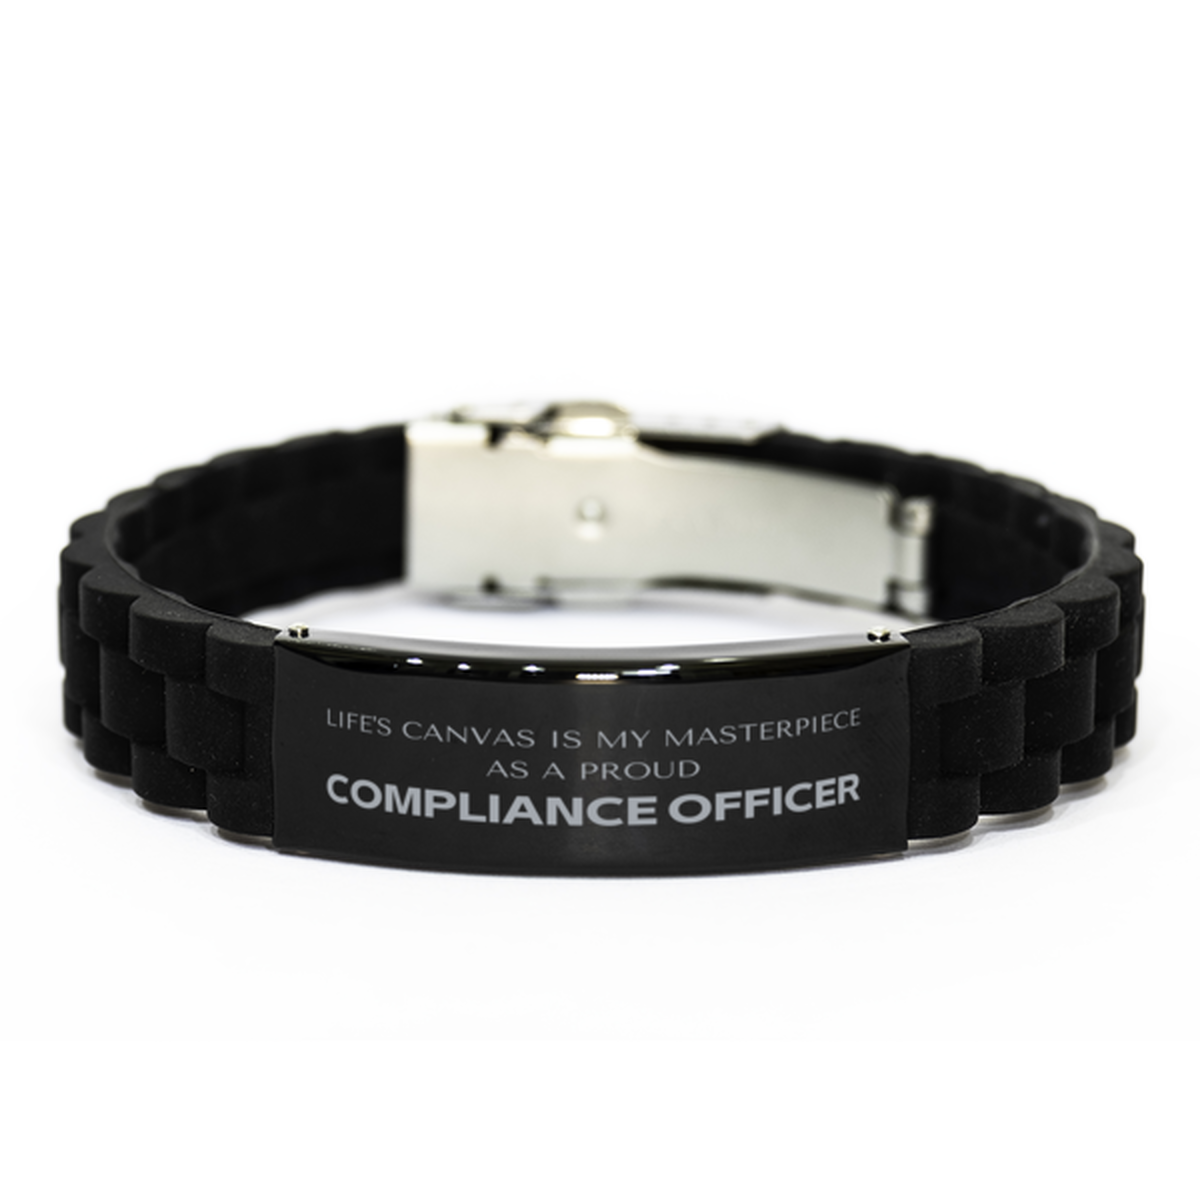 Proud Compliance Officer Gifts, Life's canvas is my masterpiece, Epic Birthday Christmas Unique Black Glidelock Clasp Bracelet For Compliance Officer, Coworkers, Men, Women, Friends